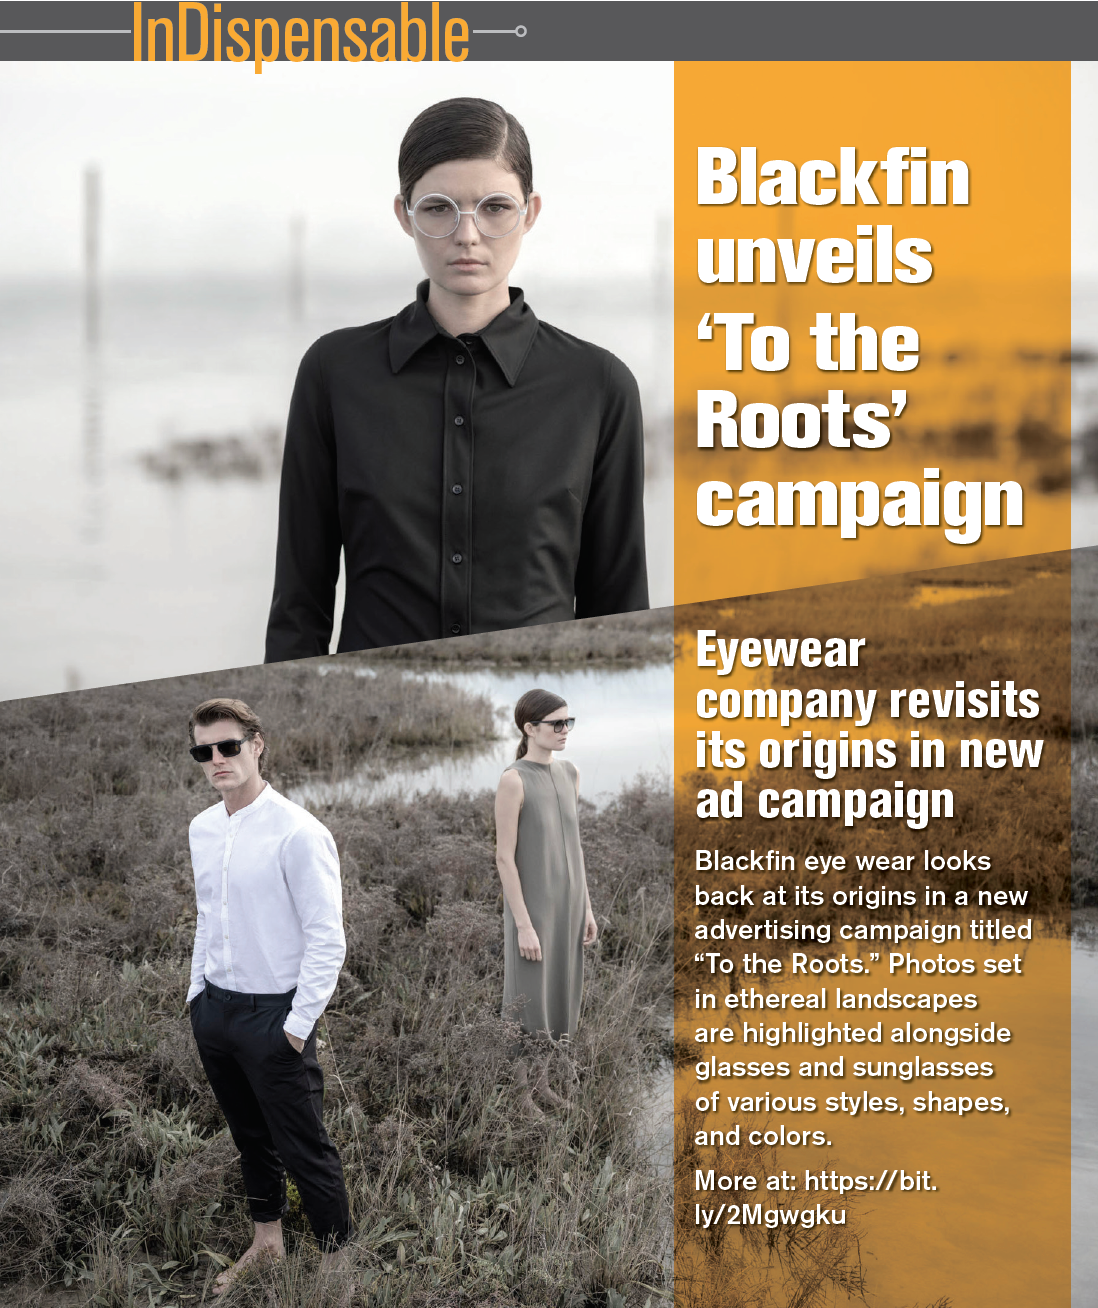 Blackfin unveils ‘To the Roots’ campaign